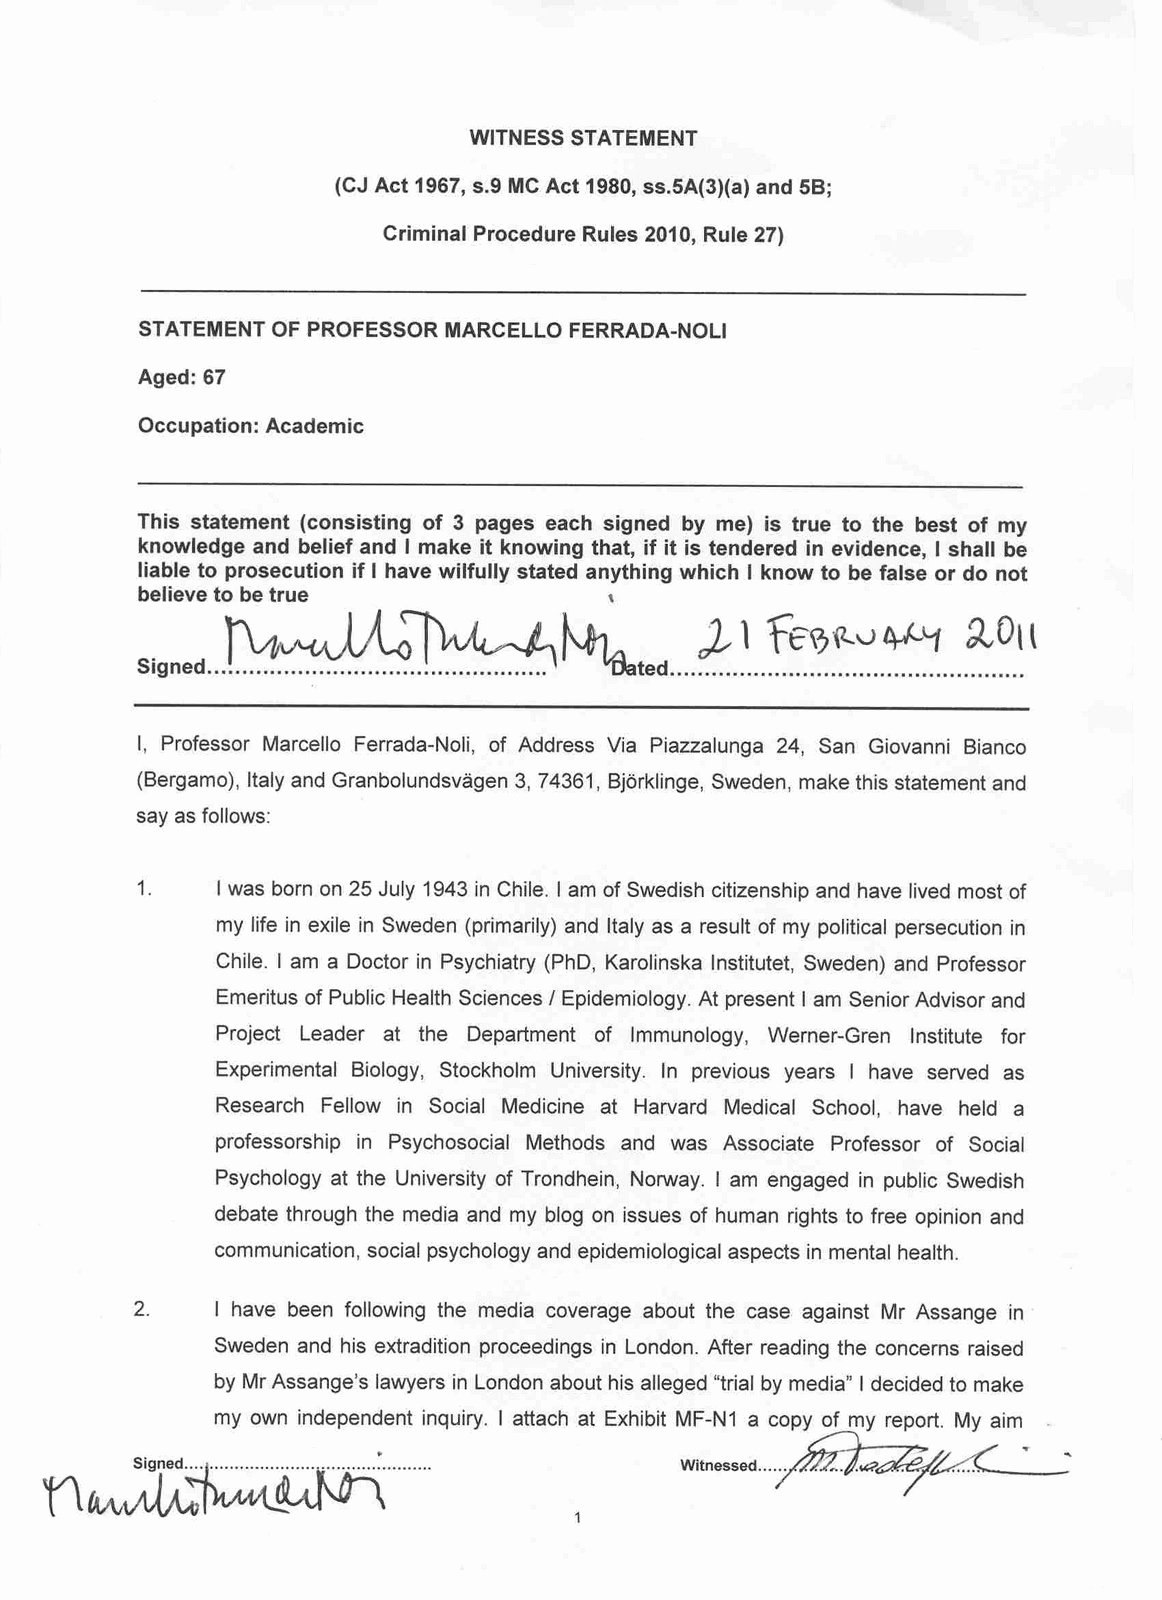 Written Statement Samples New My Witness Statement to the London Court On assange’s